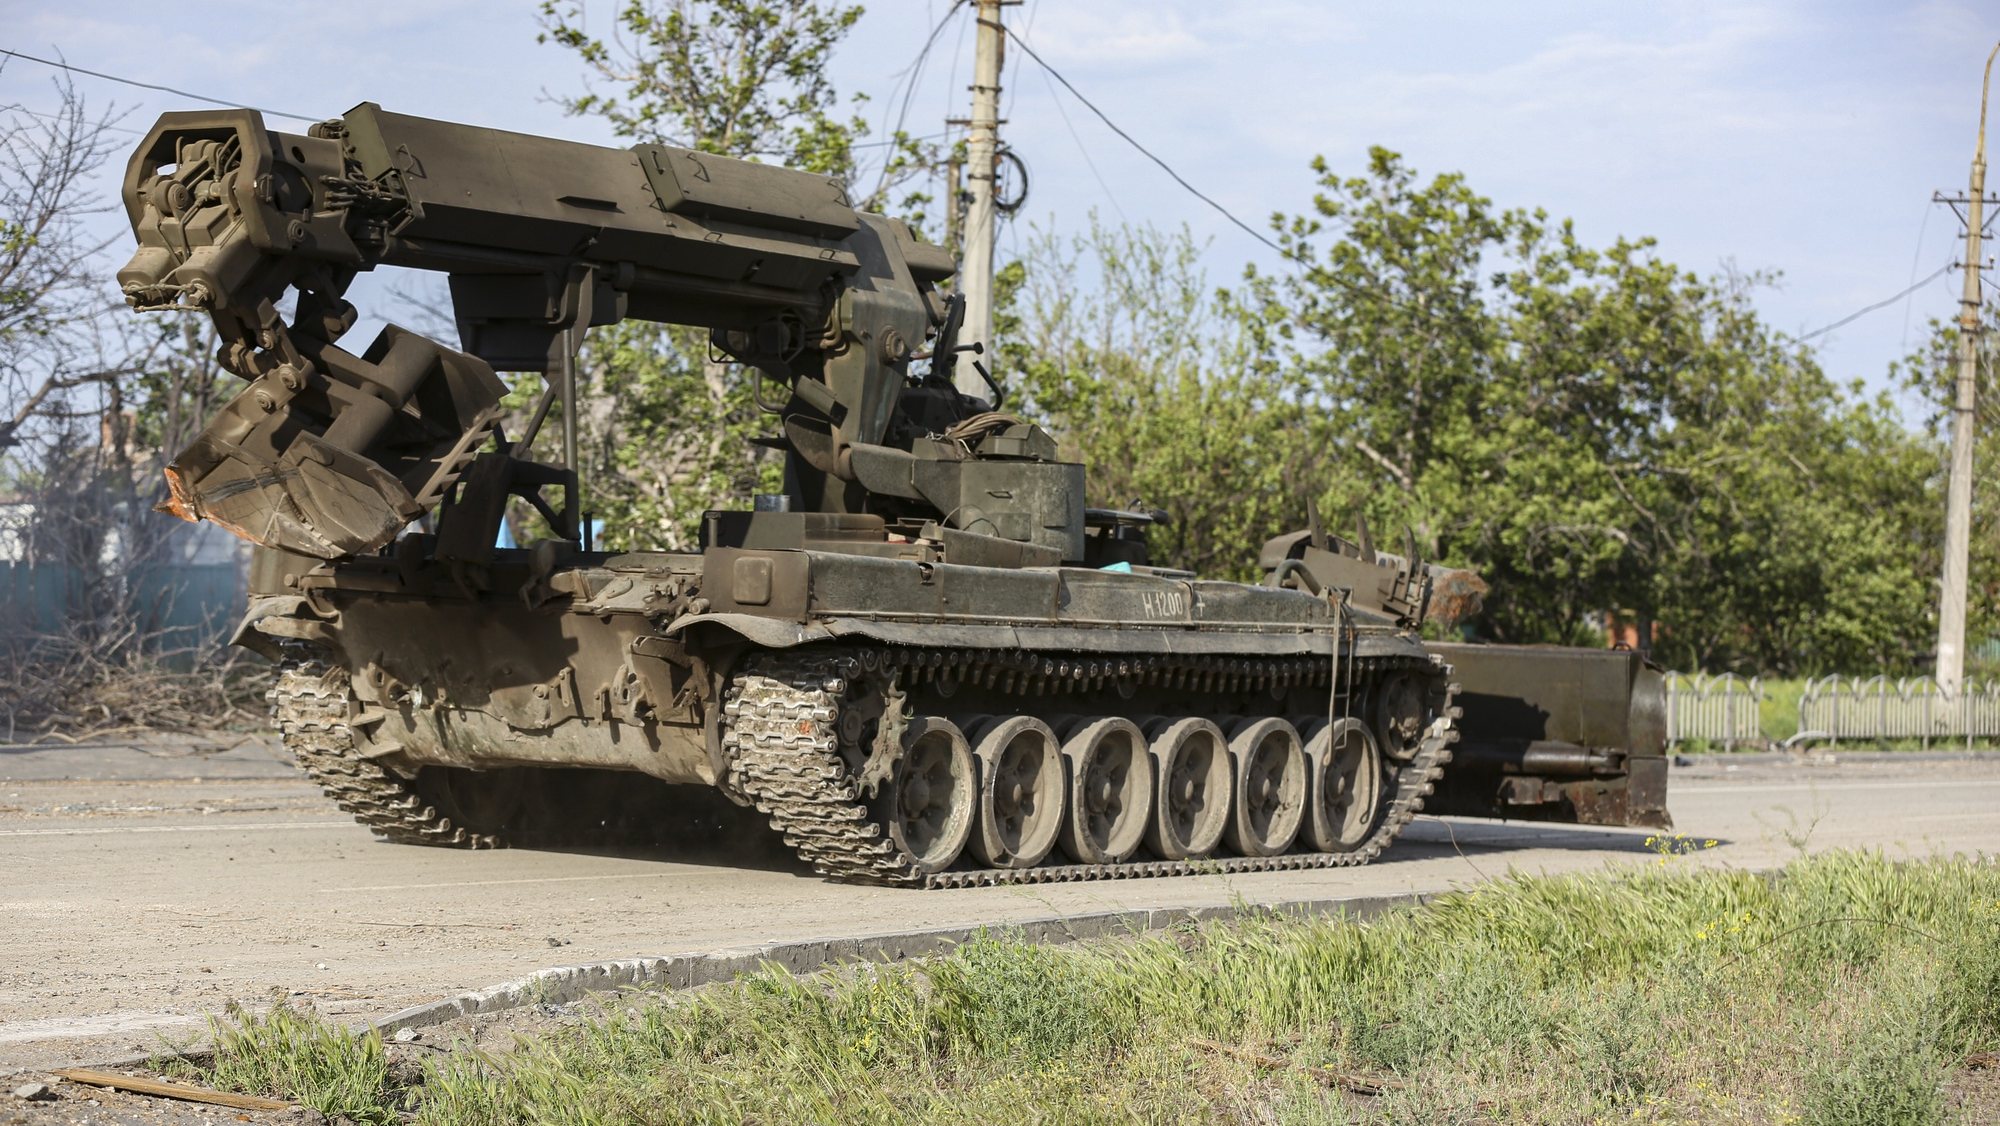 epa09965042 A Russian military vehicle moves towards the area surrounding the Azovstal steel plant to carry out a demining operation in Mariupol, Ukraine, 21 May 2022 (issued 22 May 2022). The Chief spokesman of the Russian Defense Ministry, Major General Igor Konashenkov, said on 20 May that the long-besieged Azovstal steel plant in Mariupol was under full Russian army control.  EPA/ALESSANDRO GUERRA